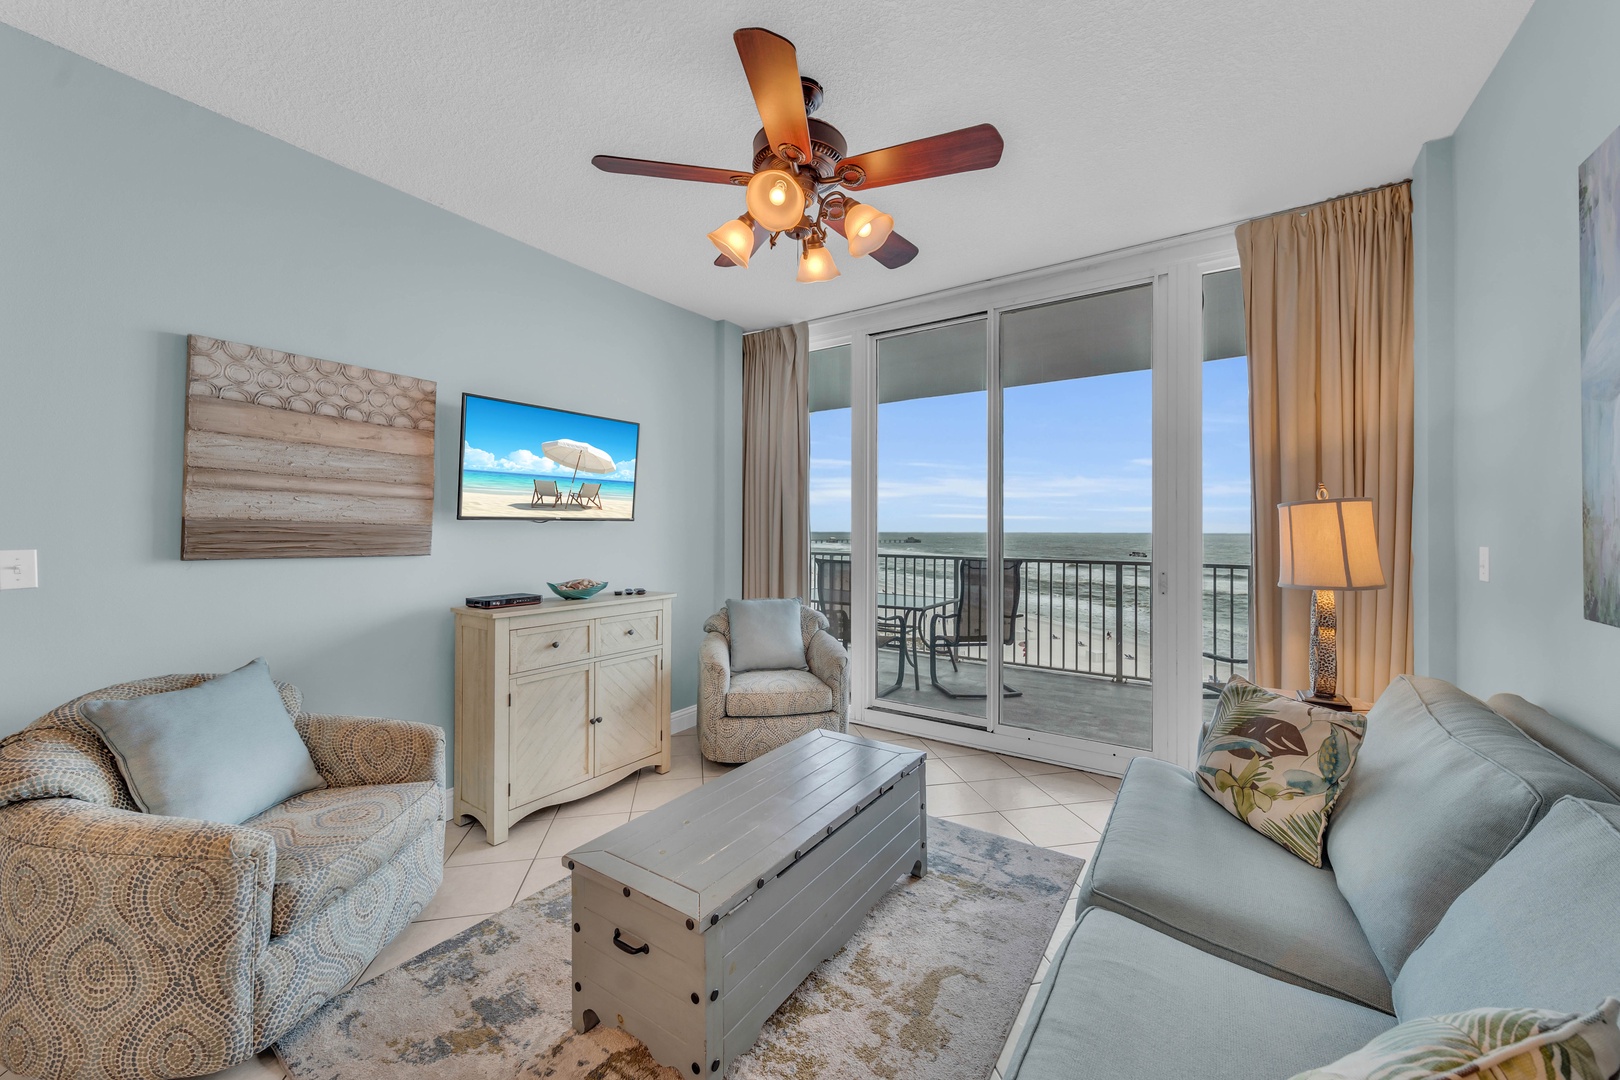 The Living Room seamlessly opens onto the expansive balcony, offering a panoramic view of the Beautiful Blue-Green waters of the Gulf of Mexico and the White Sugar Beaches of Gulf Shores.